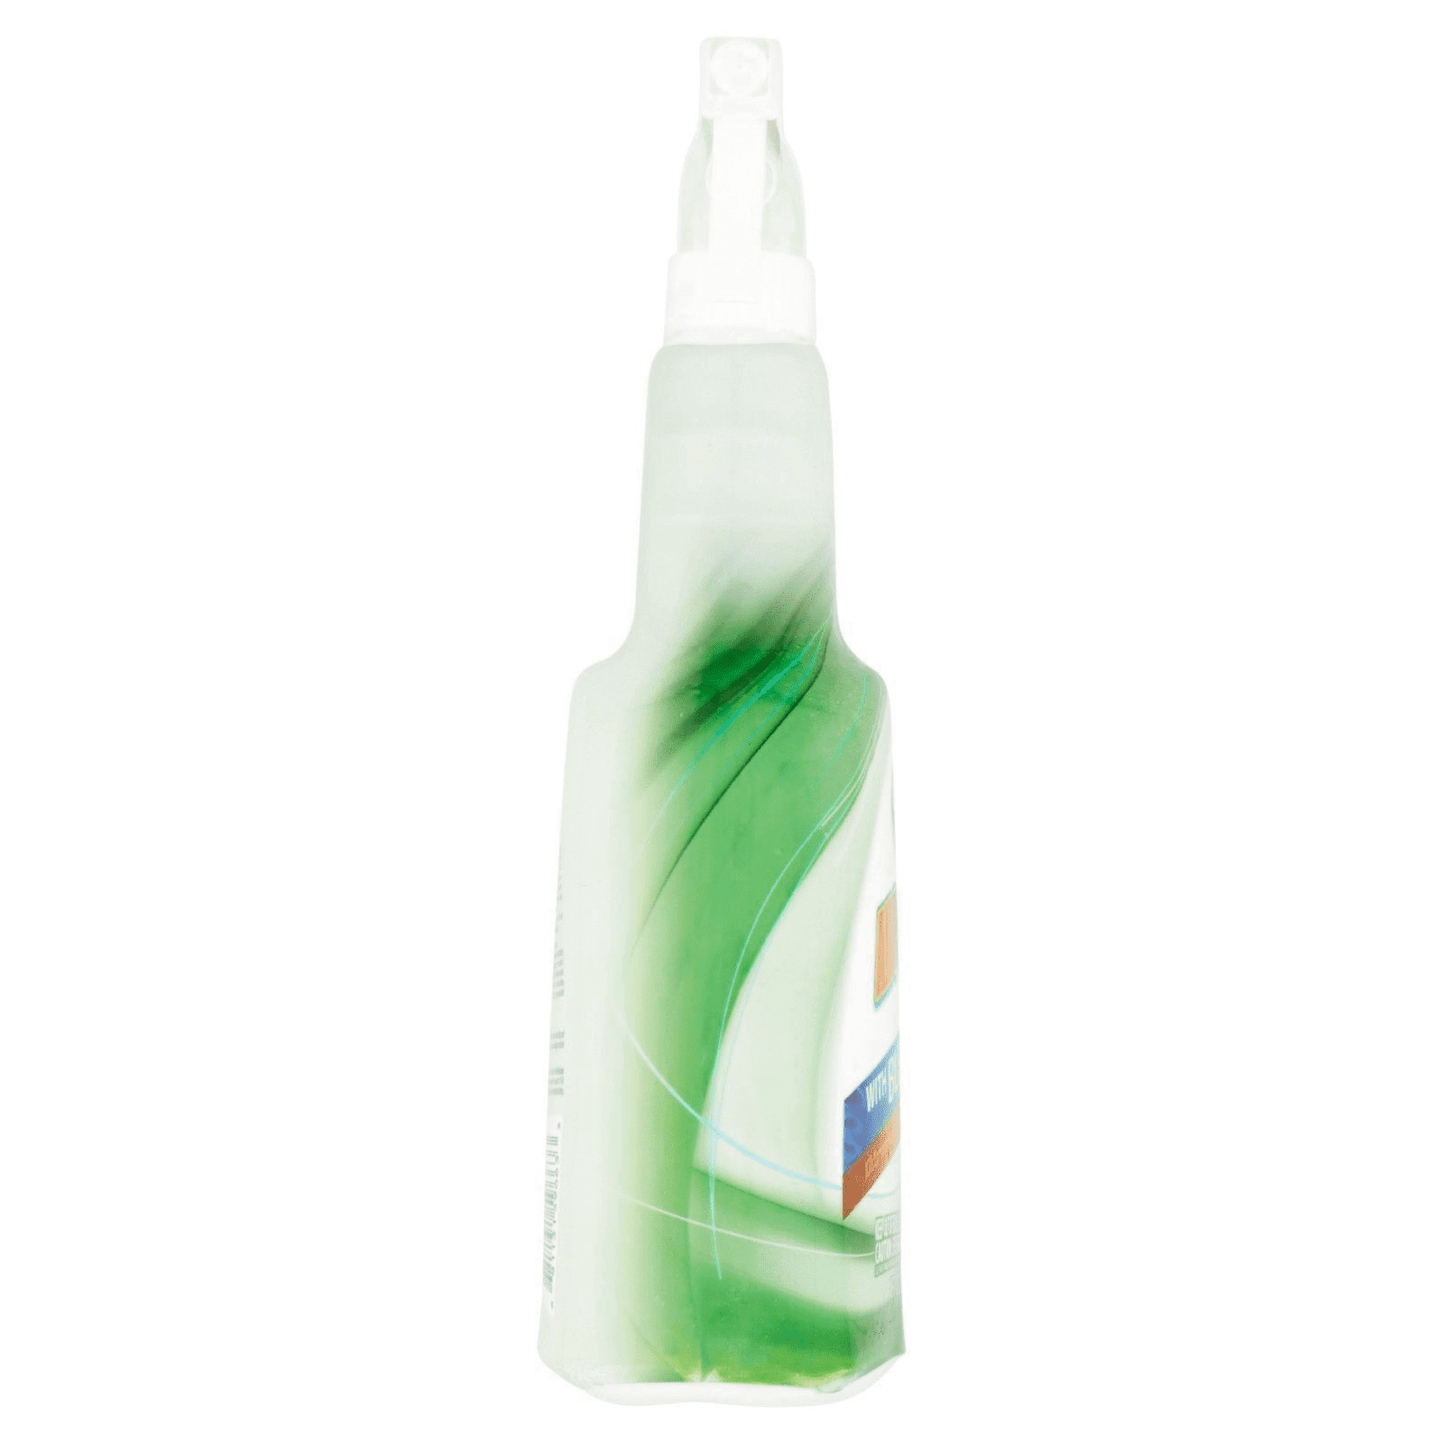 All Purpose Cleaner with Bleach 32 fl oz by Great Value